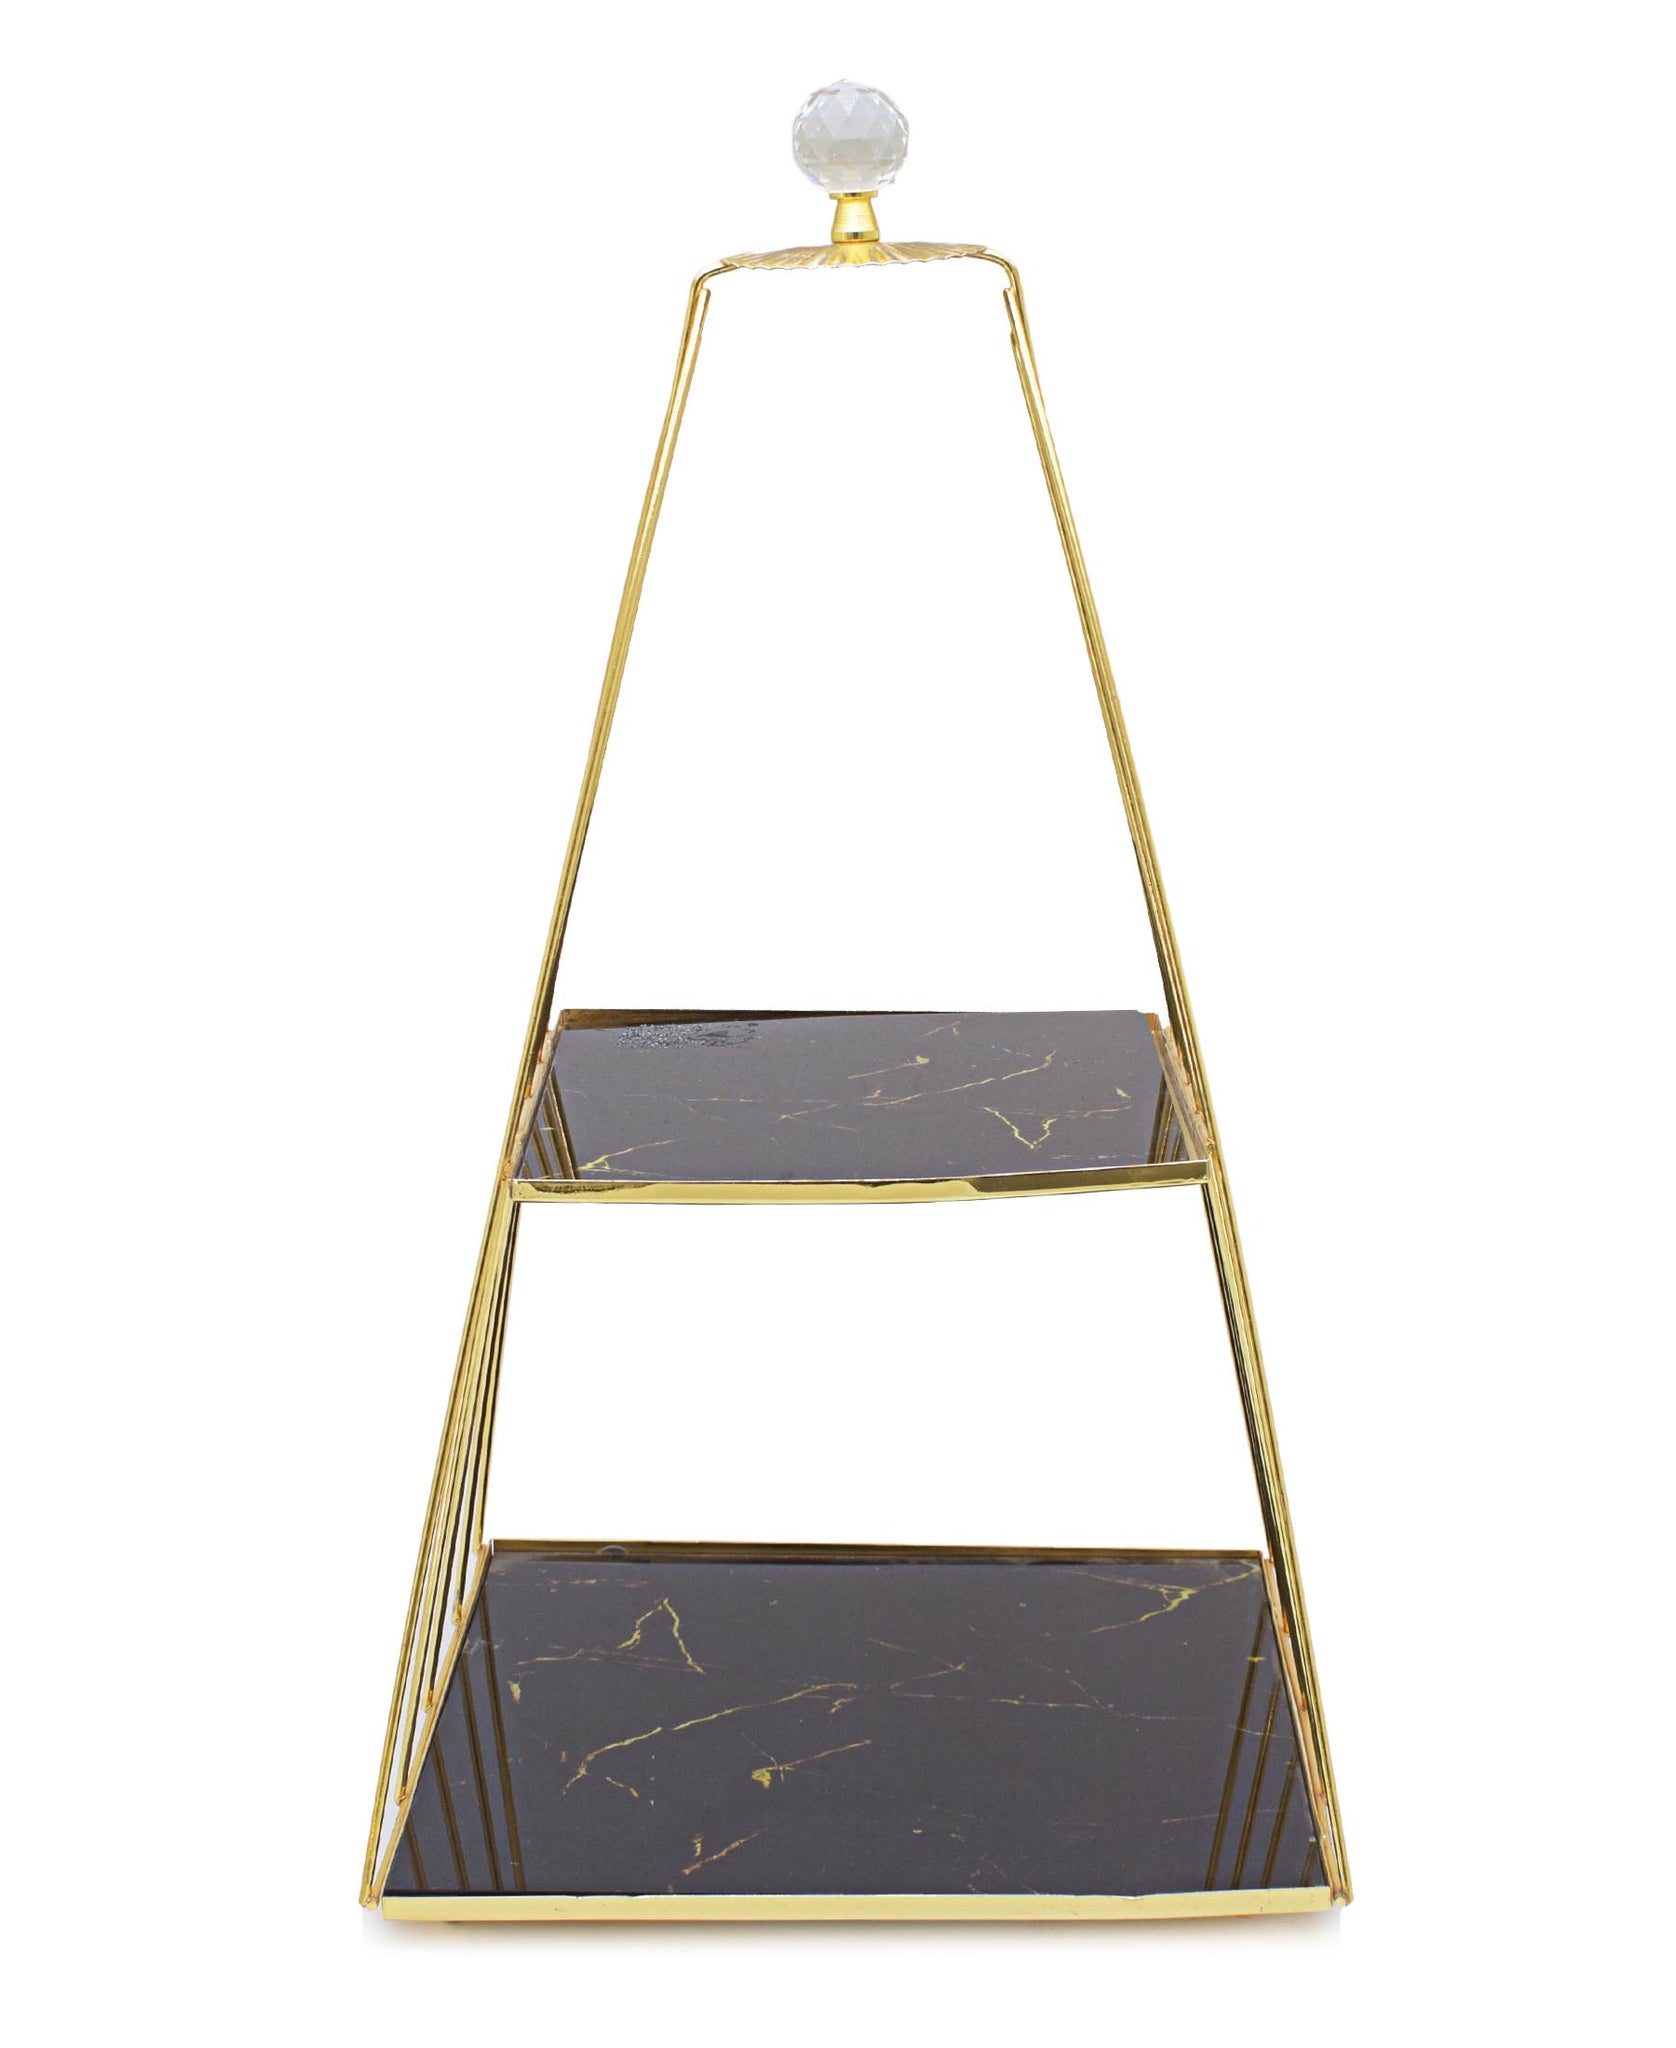 Bursa Collection 2 Tier Stand With Tray - Gold